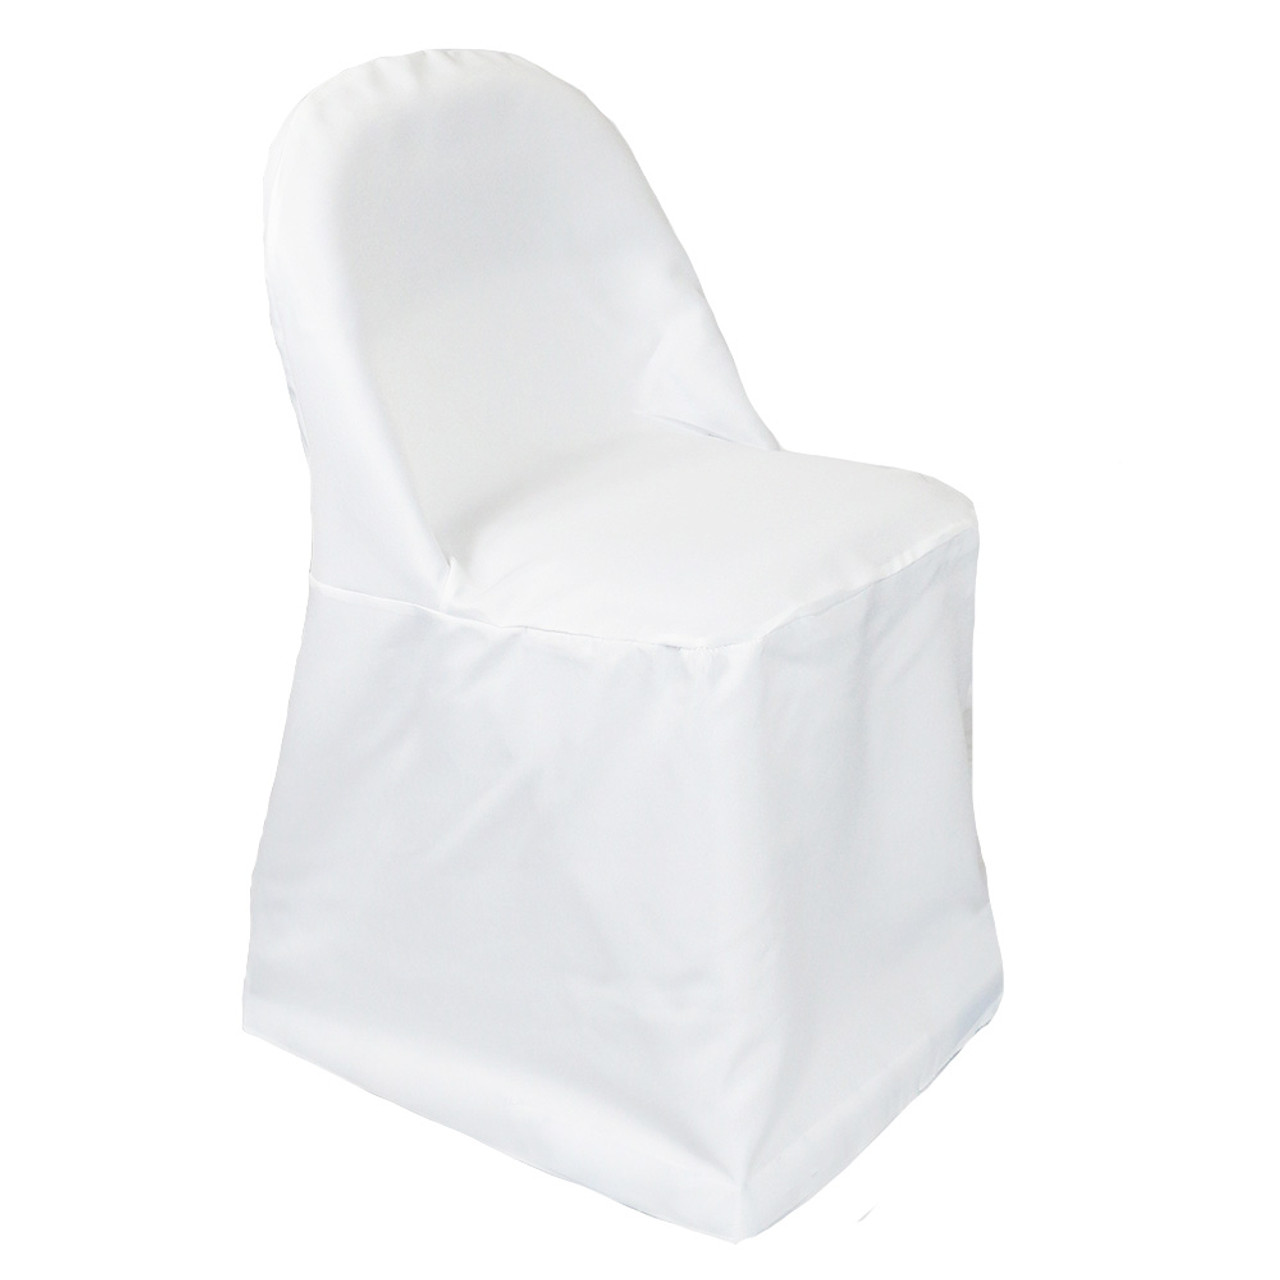 Polyester Folding Chair Cover White Default  86356.1580321364 ?c=2